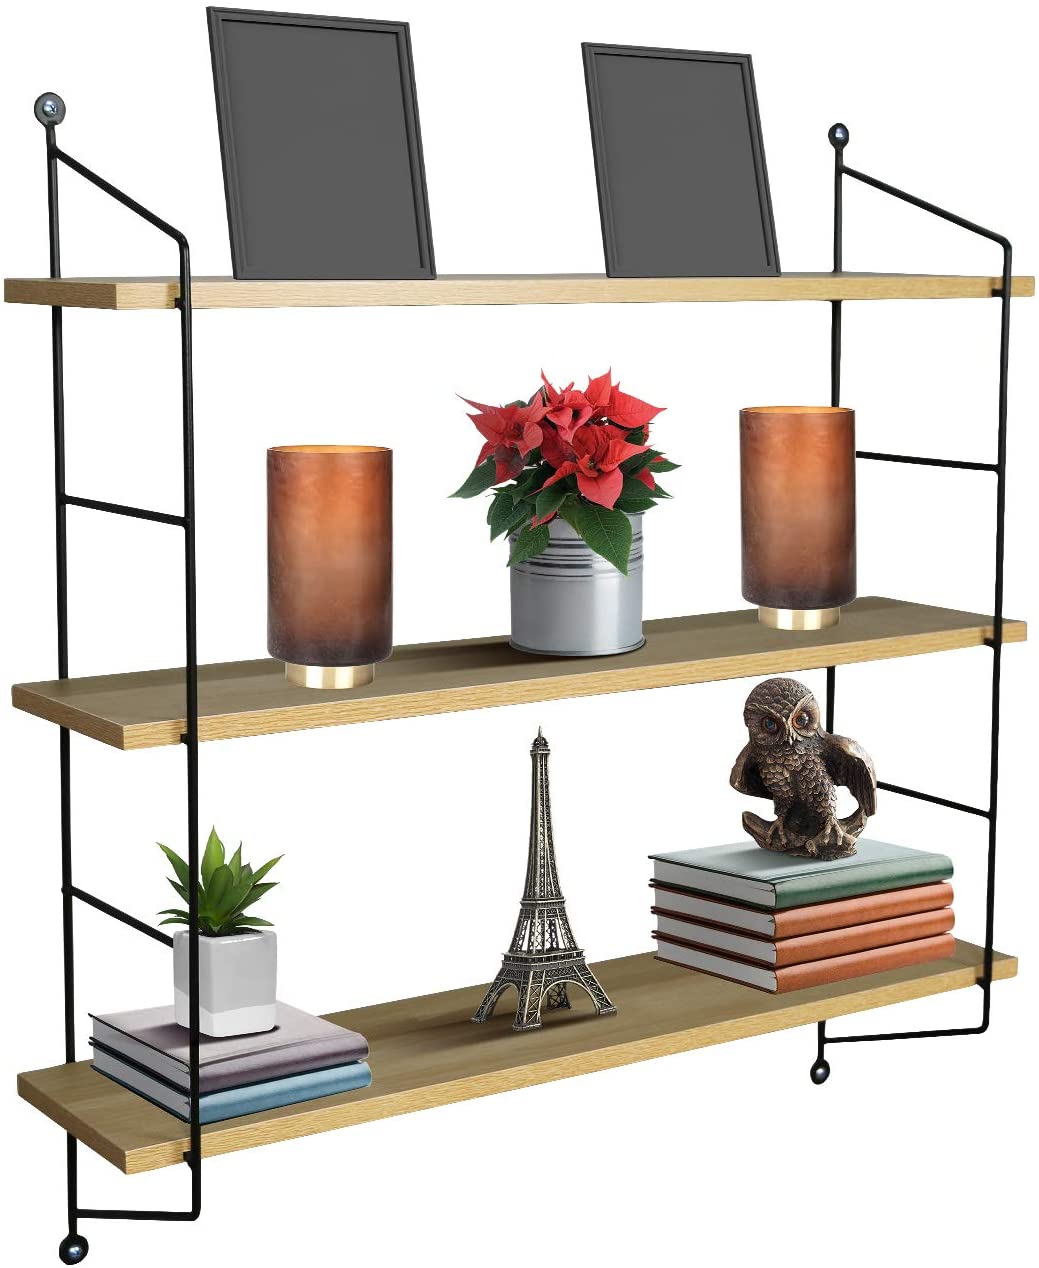 Wholesale Price 3-tier Wood And Metal Floating Wall Shelf Featured Image